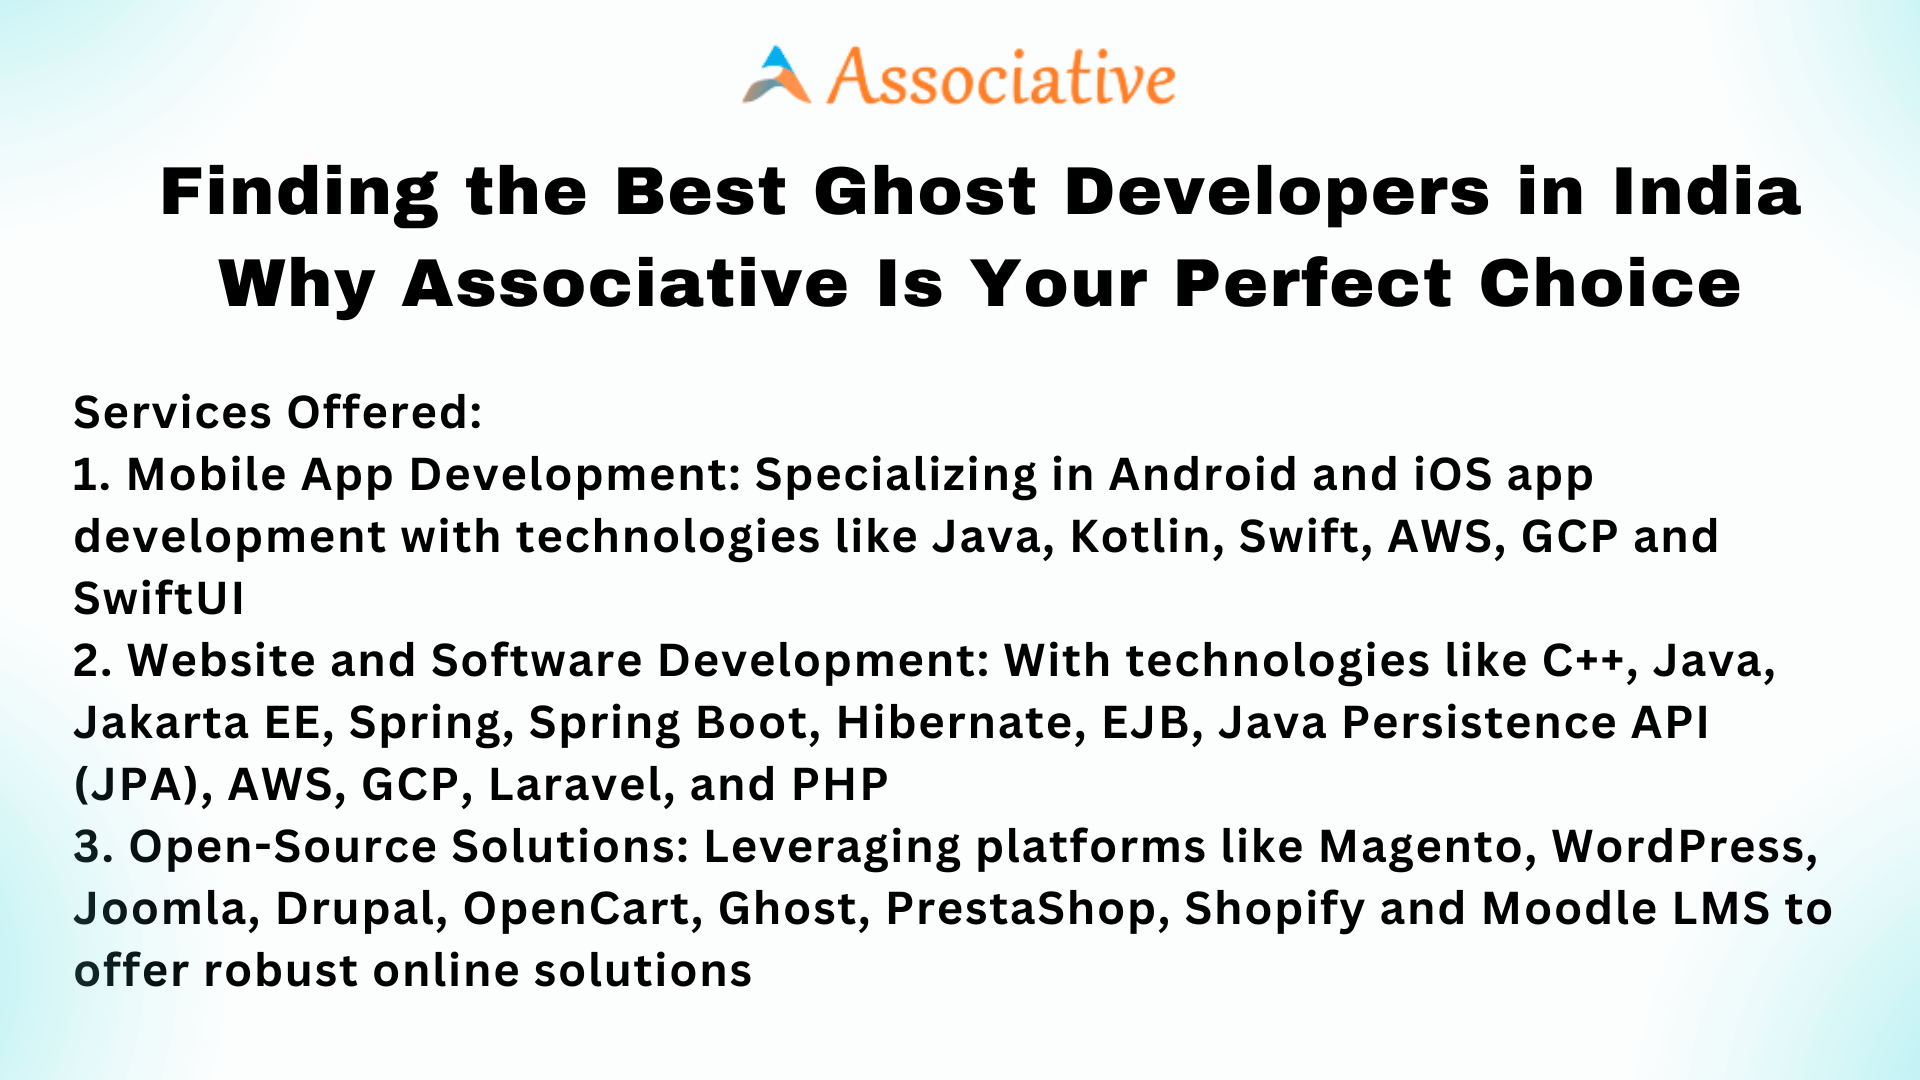 Finding the Best Ghost Developers in India Why Associative Is Your Perfect Choice